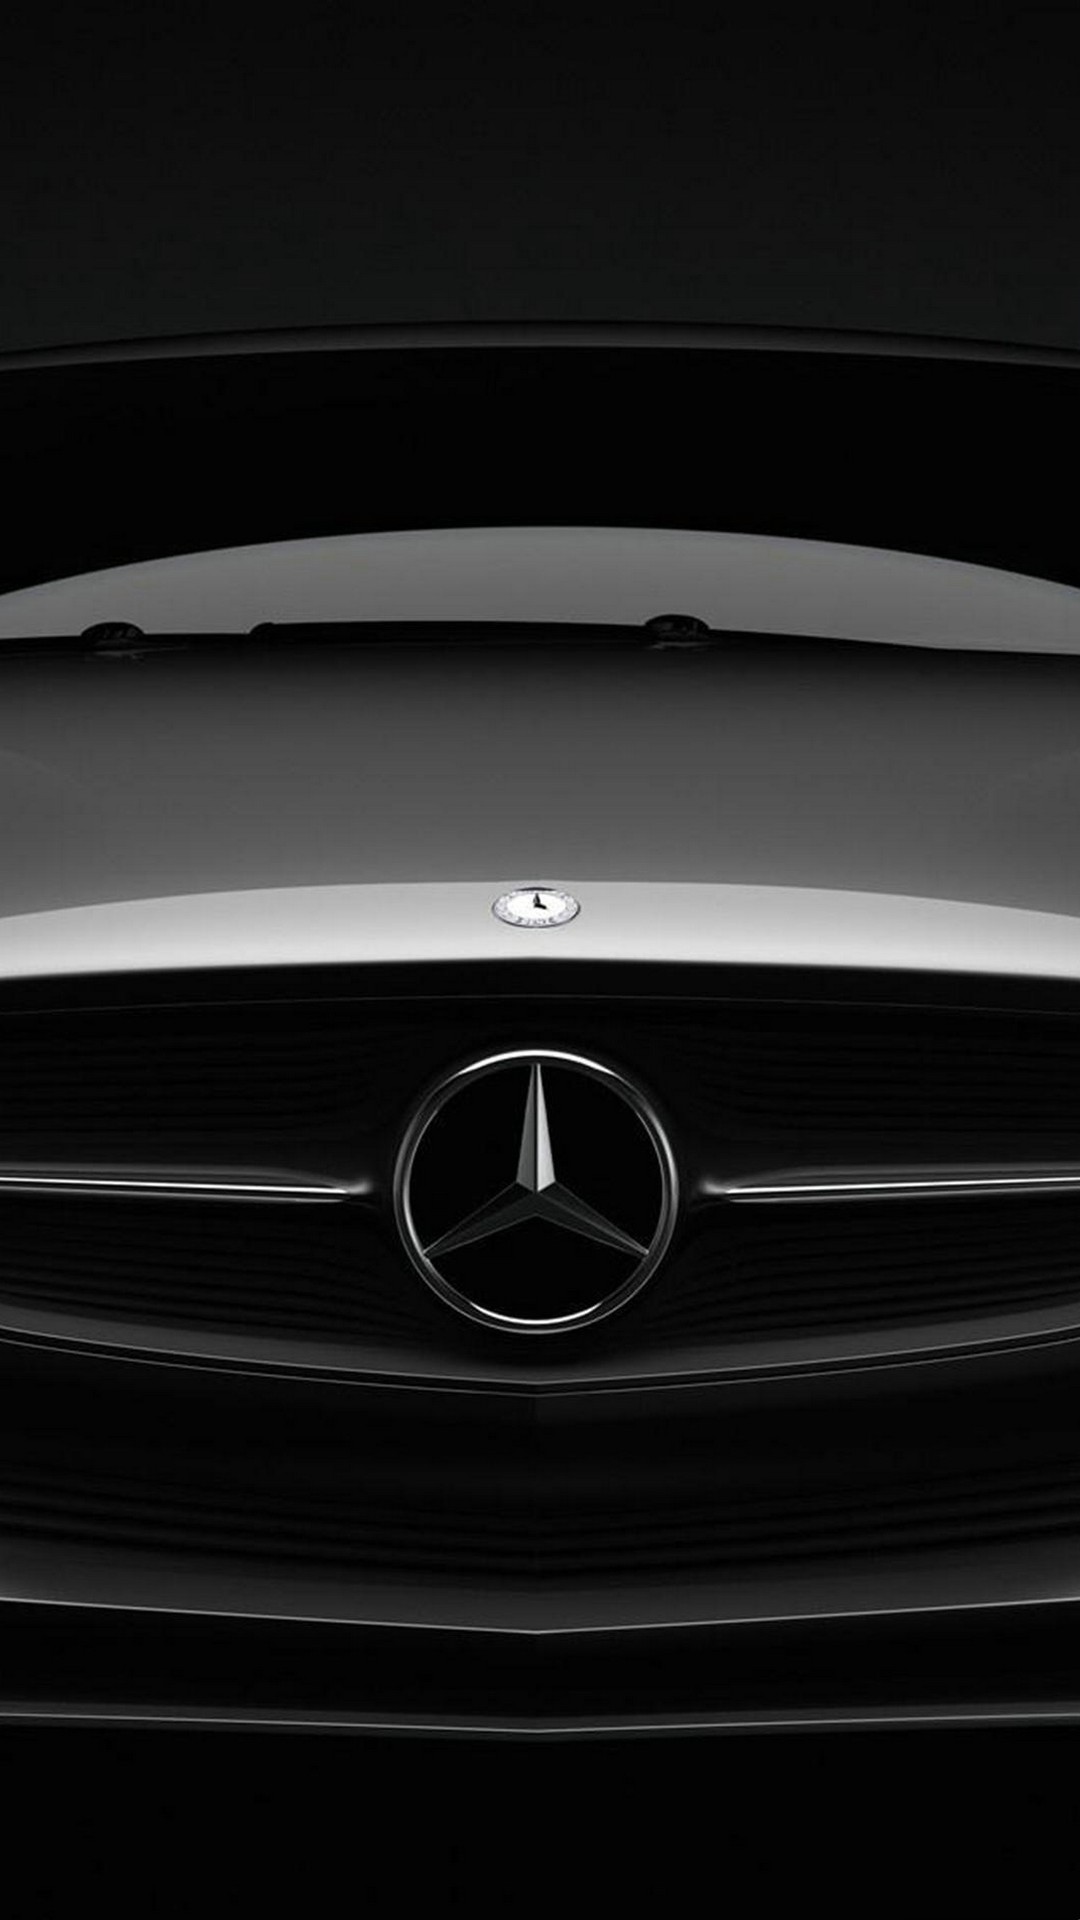 Mercedes Android Wallpaper HD with HD resolution 1080x1920